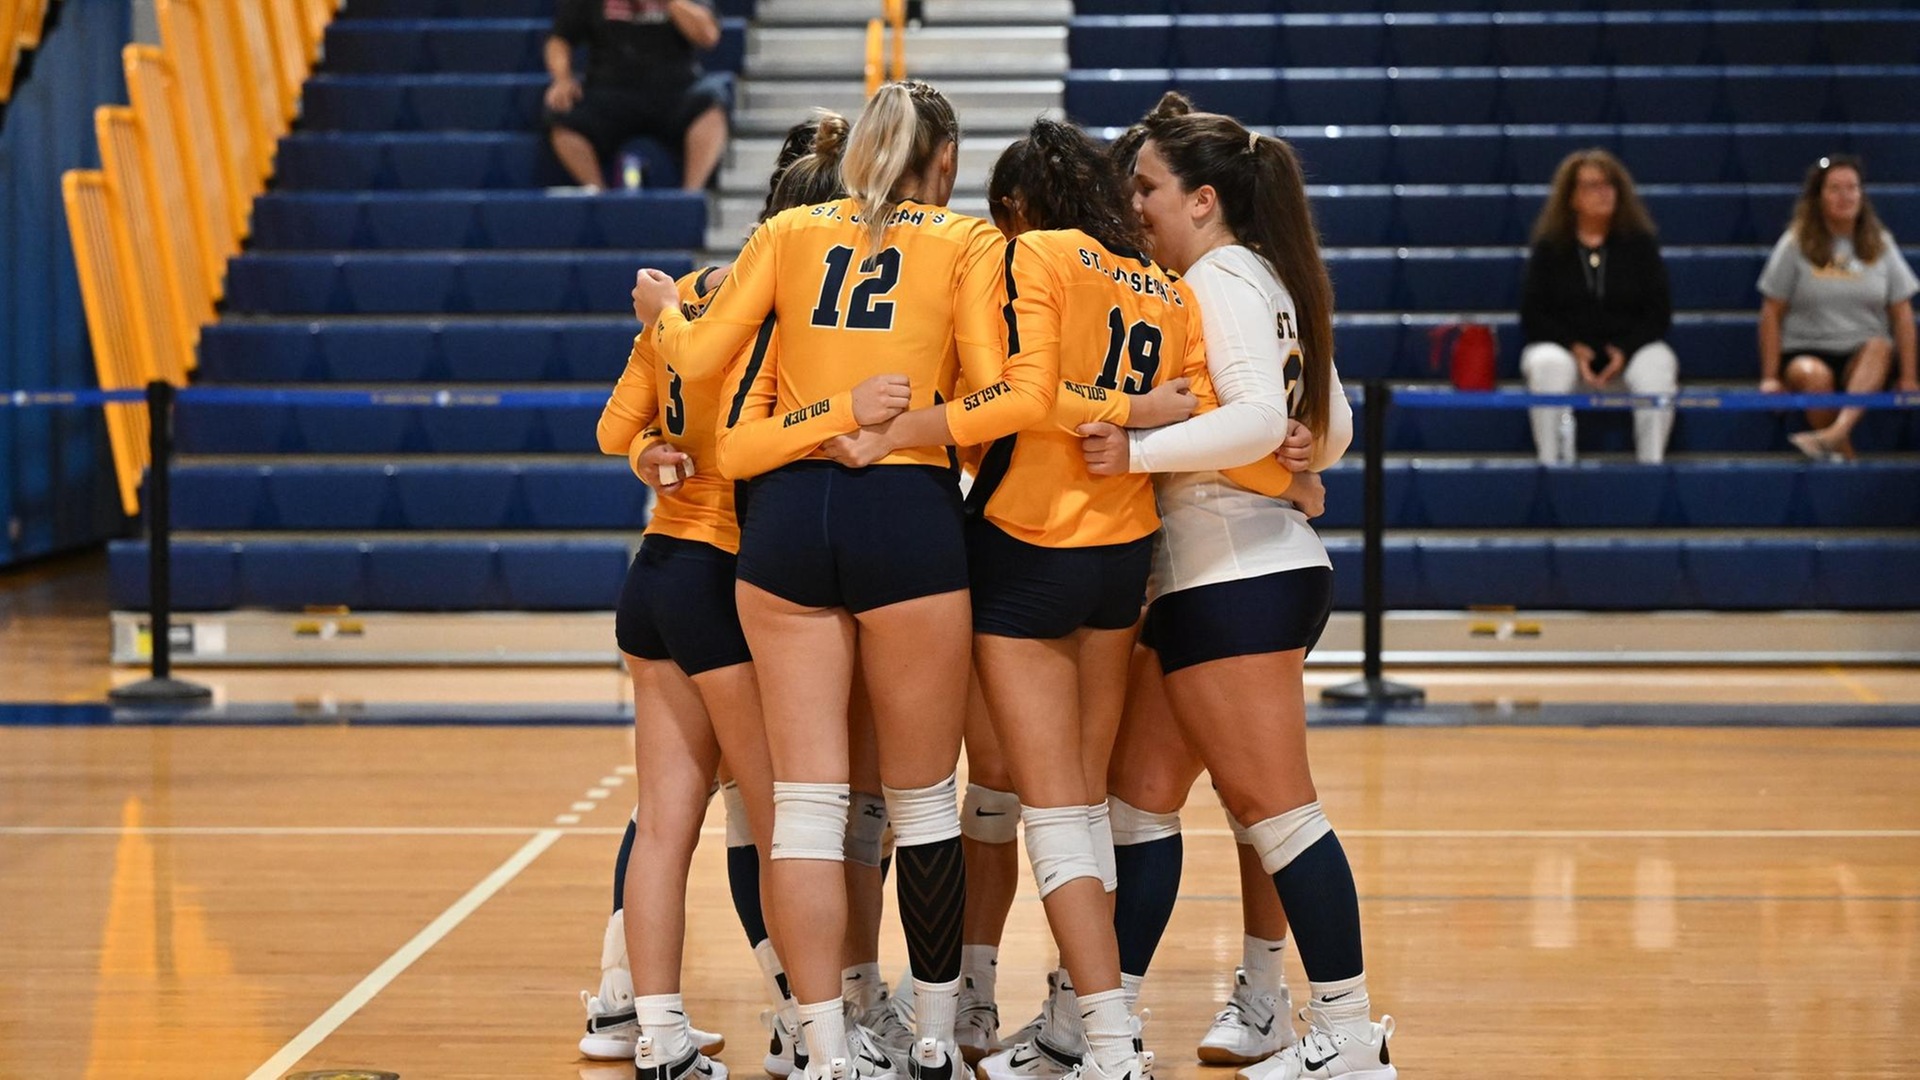 Women's Volleyball Suffers Five-Set Loss to Farmingdale